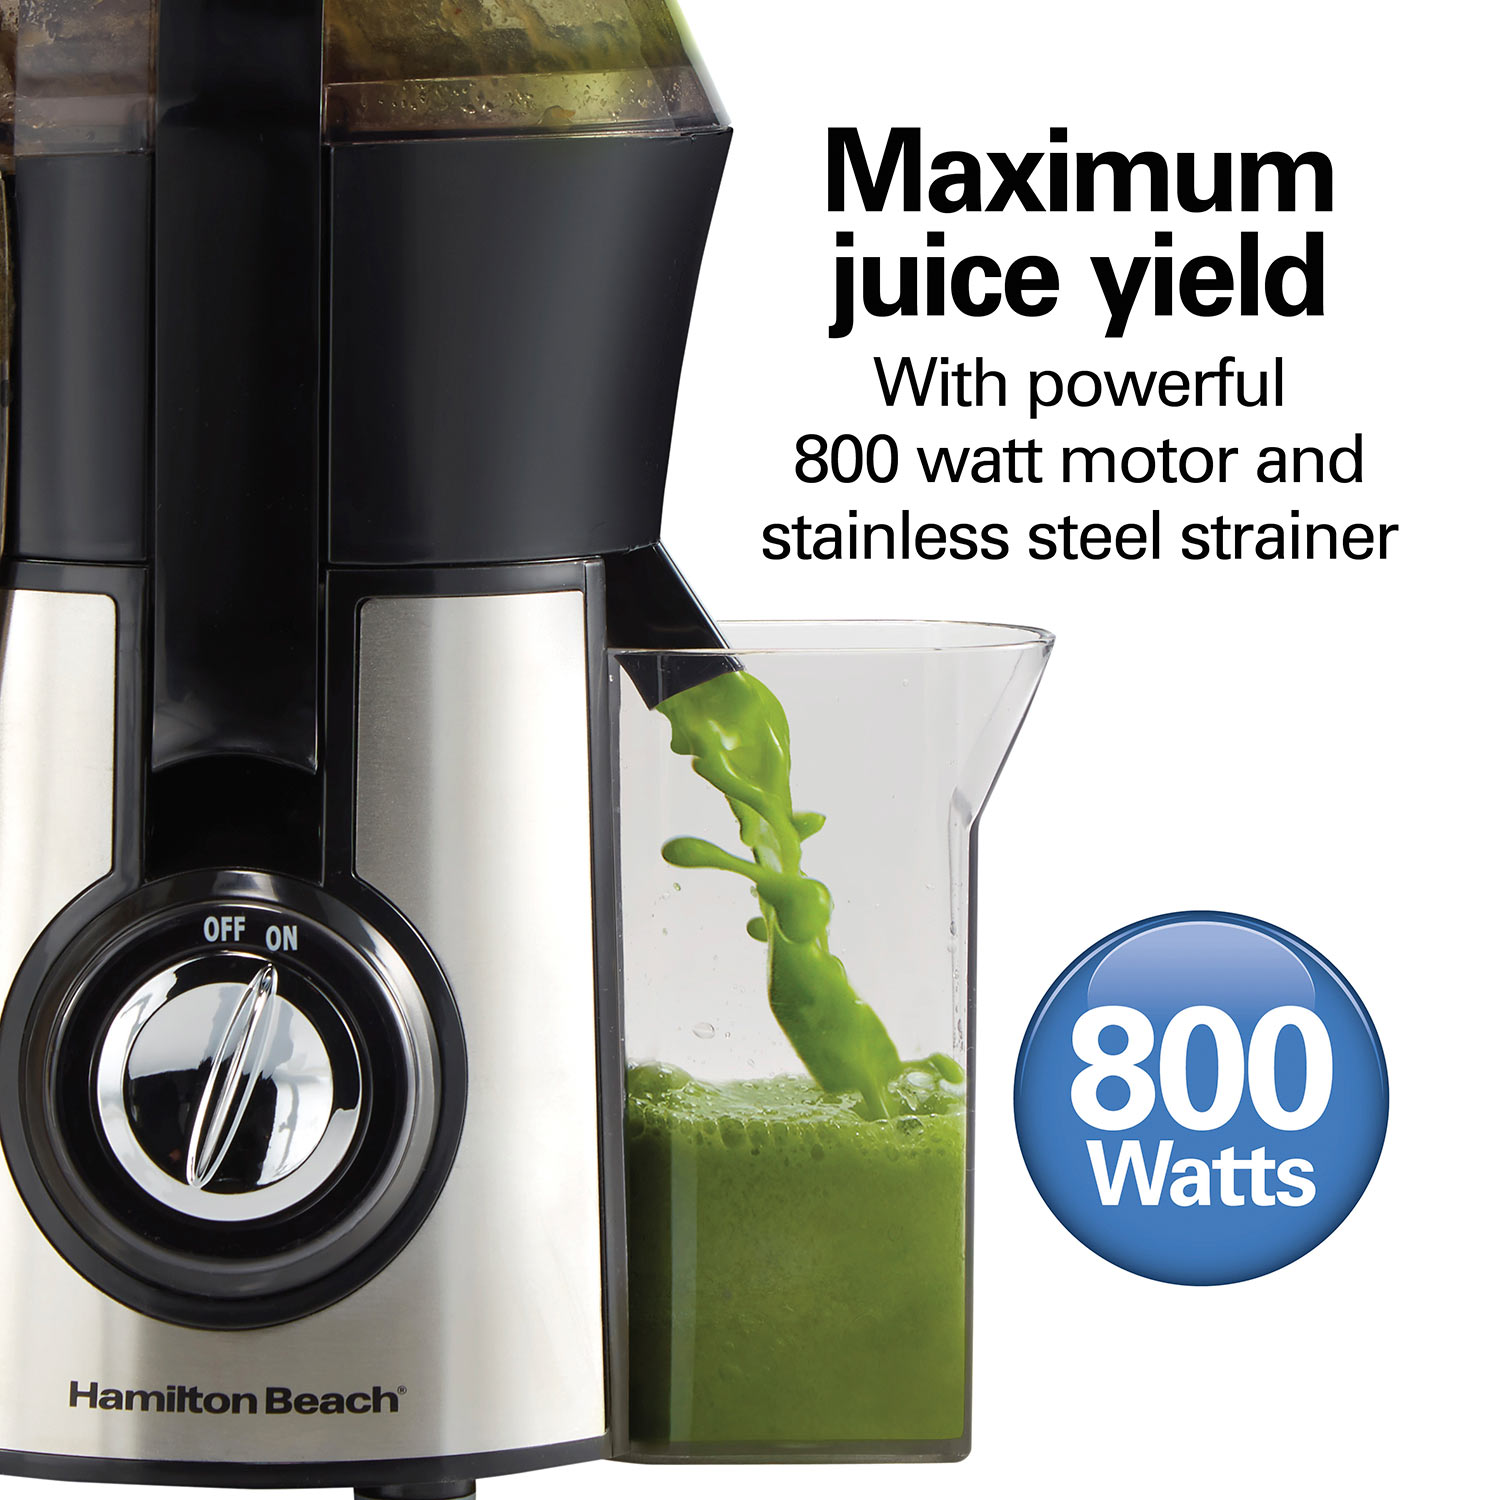 Big Mouth® Pro Juice Extractor